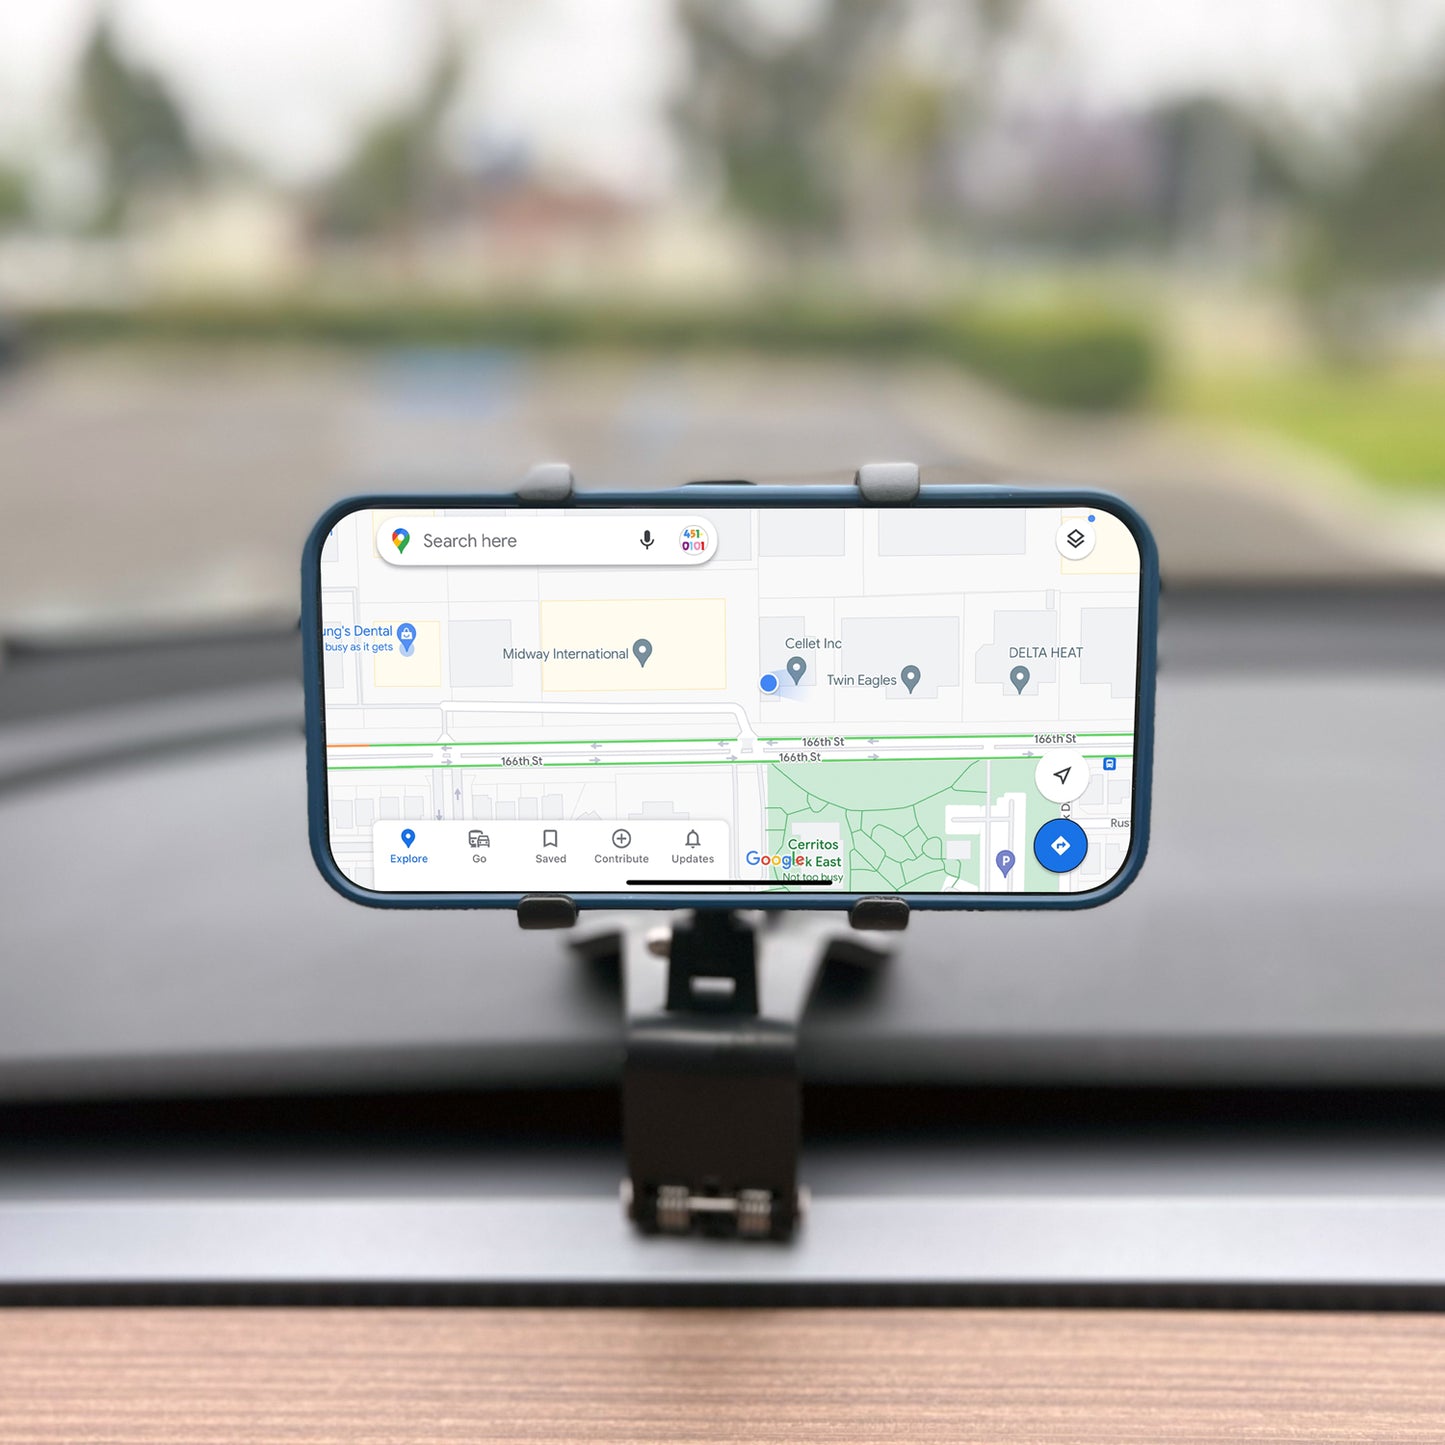 PHD280 - Dashboard, Sun Visor & Rear View Mirror Clip Mount with Heavy Duty Spring Base, 360° Cradle Rotation Compatible to iPhone 13 Pro Max and More